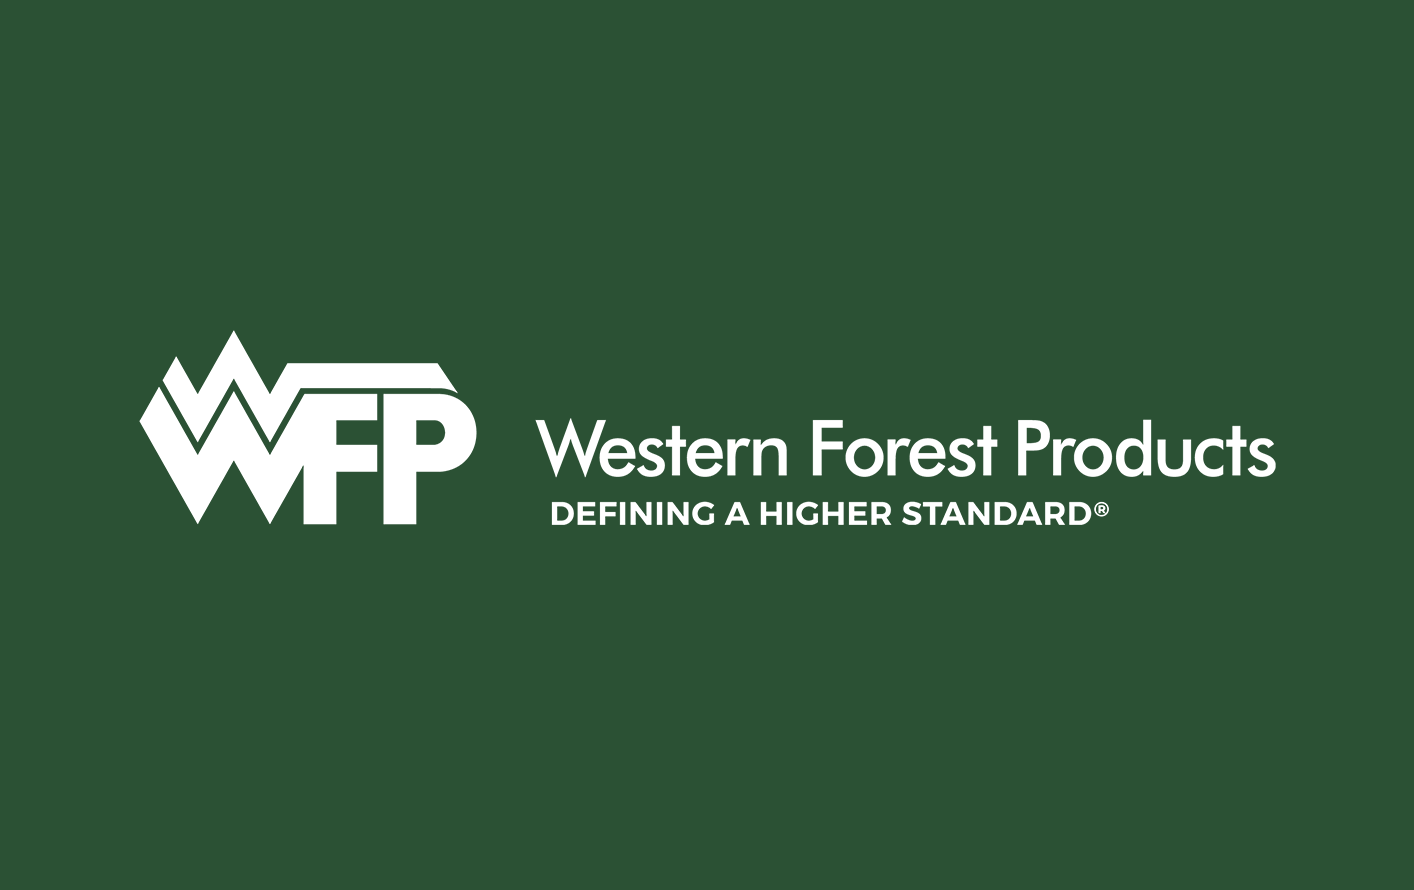 Bridging Agreement between Quatsino First Nation and Western Forest Products Represents a Meaningful Step Towards Reconciliation and Rights Recognition on North Island